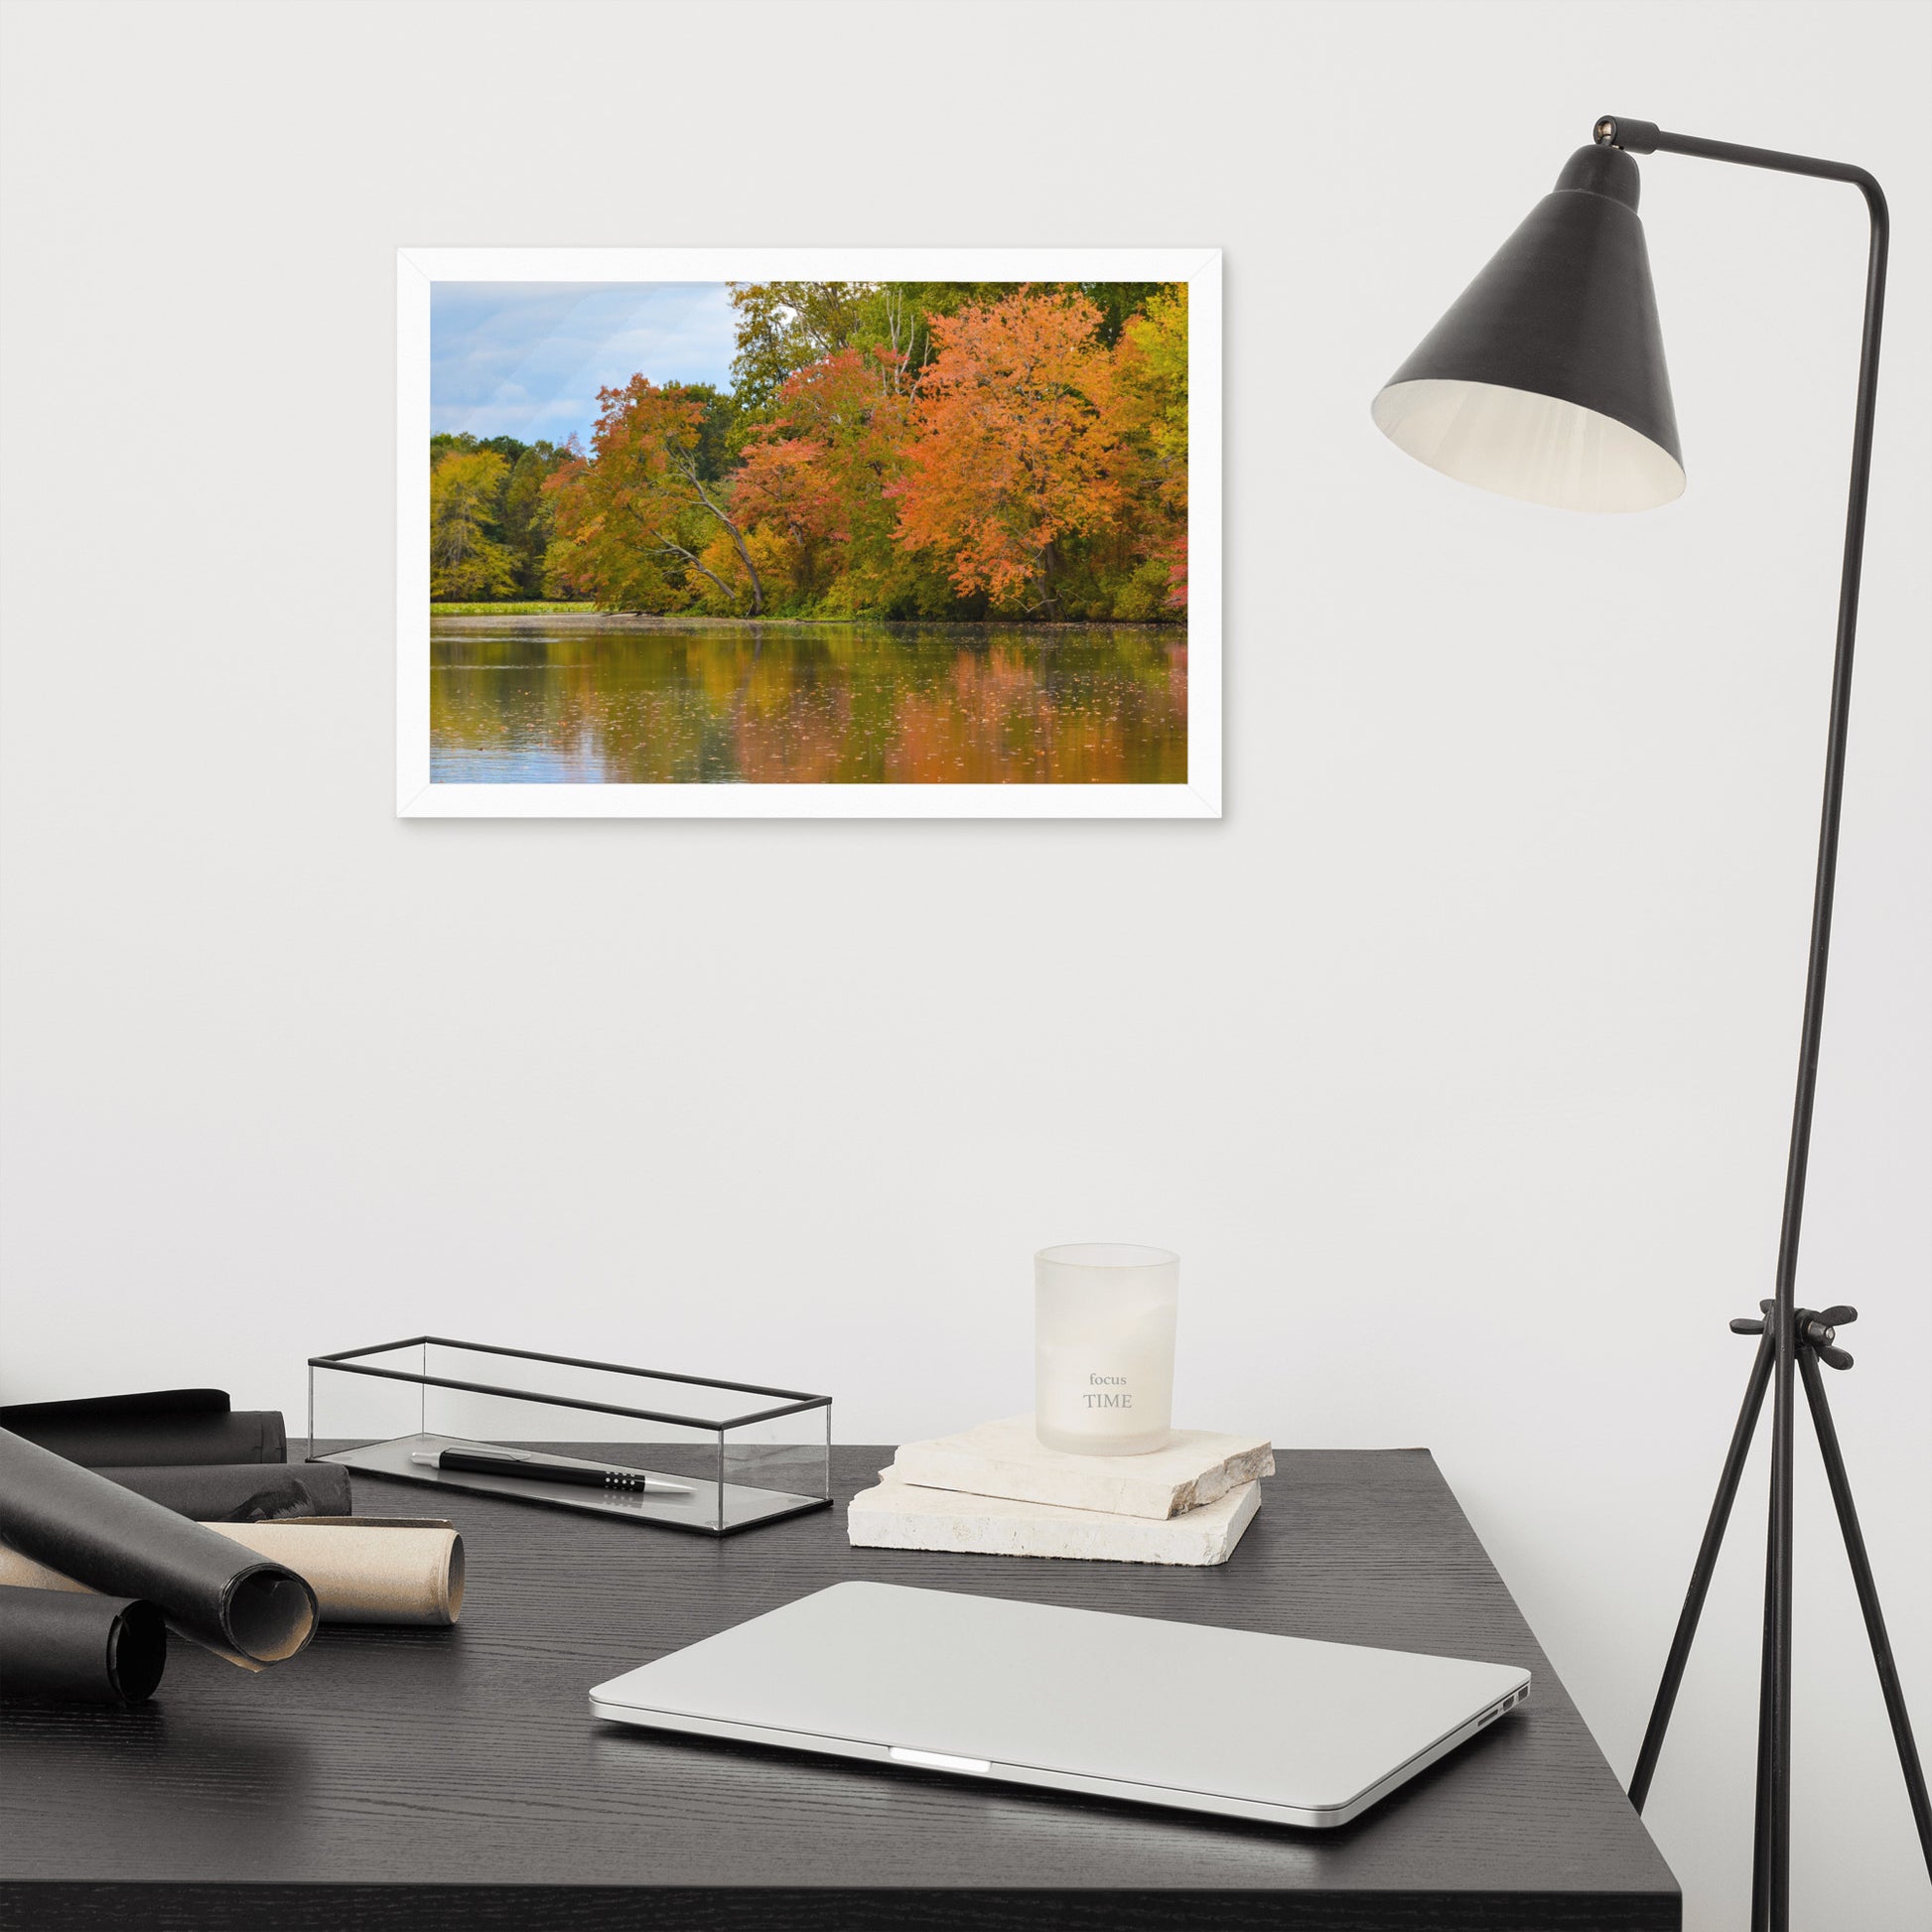 Rustic Framed Art: Autumn Tree Line - Rural / Country Style Landscape / Nature Photograph  Framed Wall Art Print - Wall Decor - Artwork